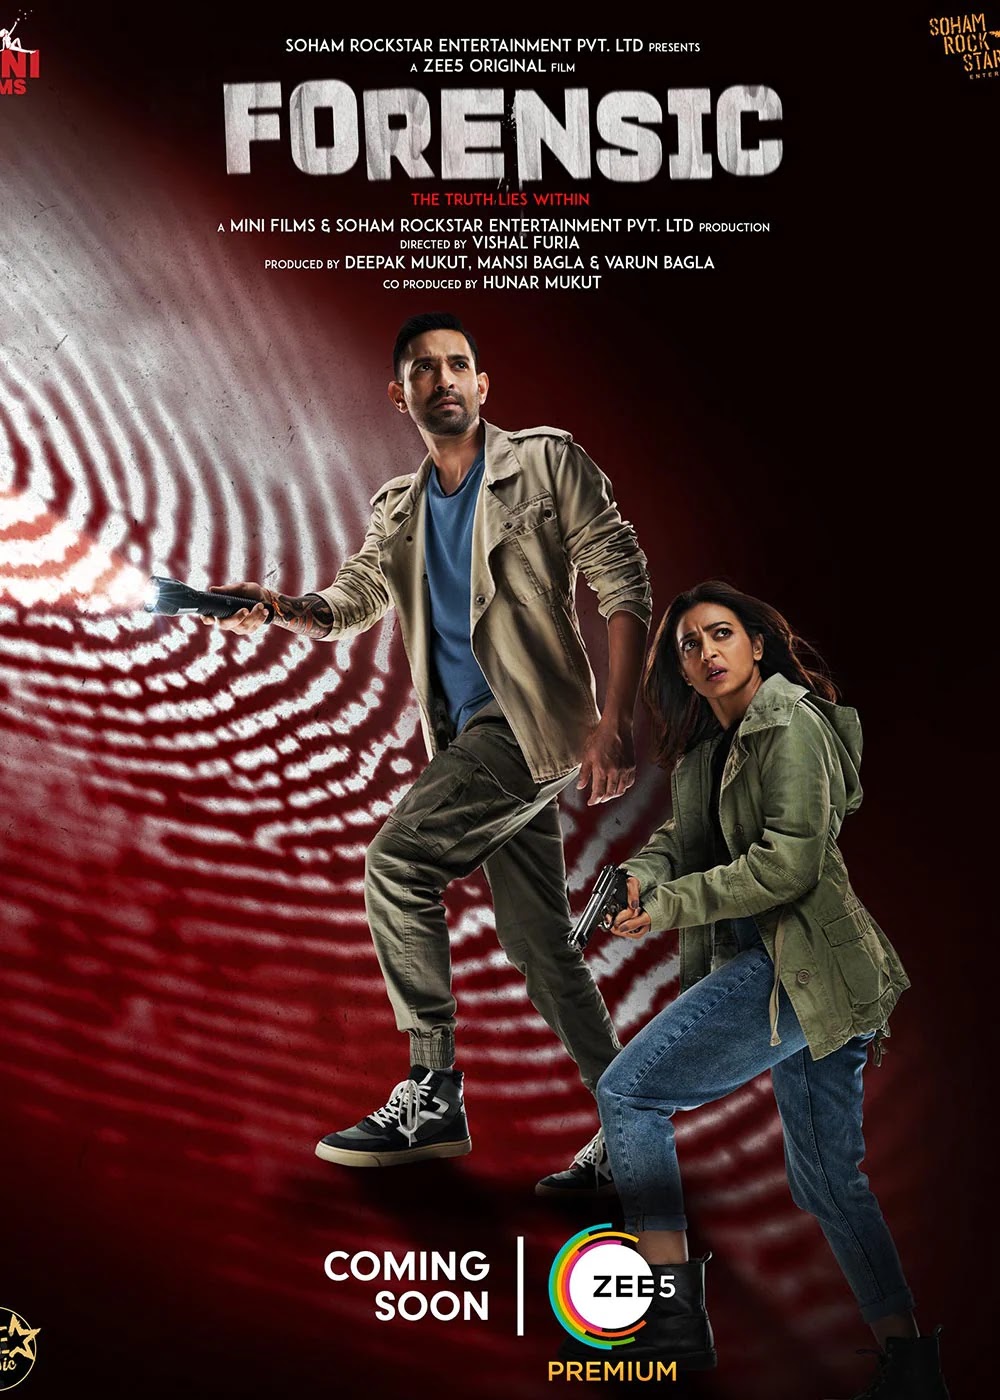 Forensic full cast and crew Wiki - Check here Bollywood movie Forensic 2022 wiki, story, release date, wikipedia Actress name poster, trailer, Video, News